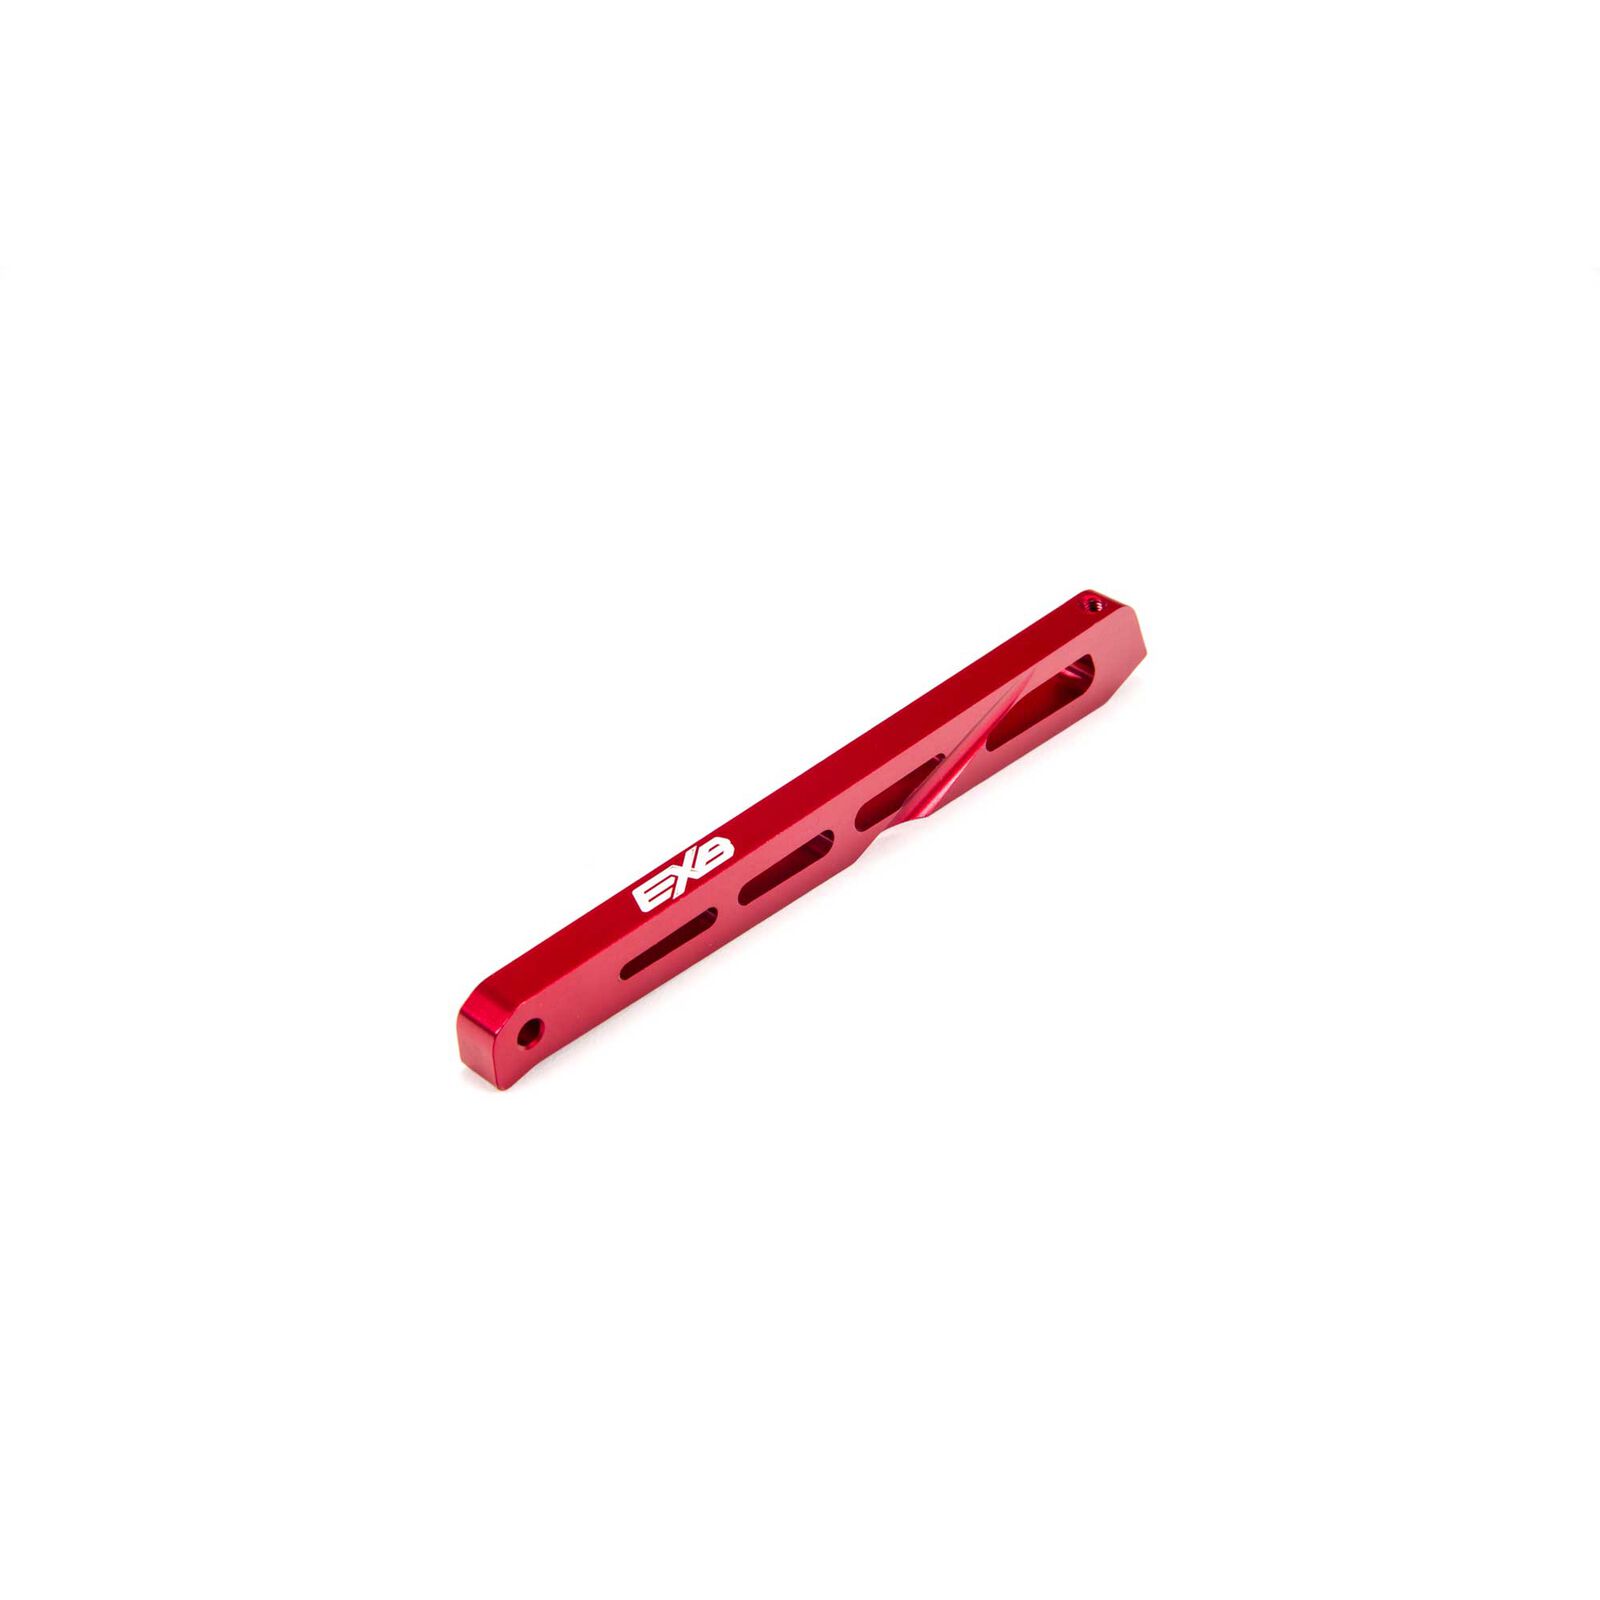 Rear Center Aluminum Chassis Brace, 120mm Red: EXB